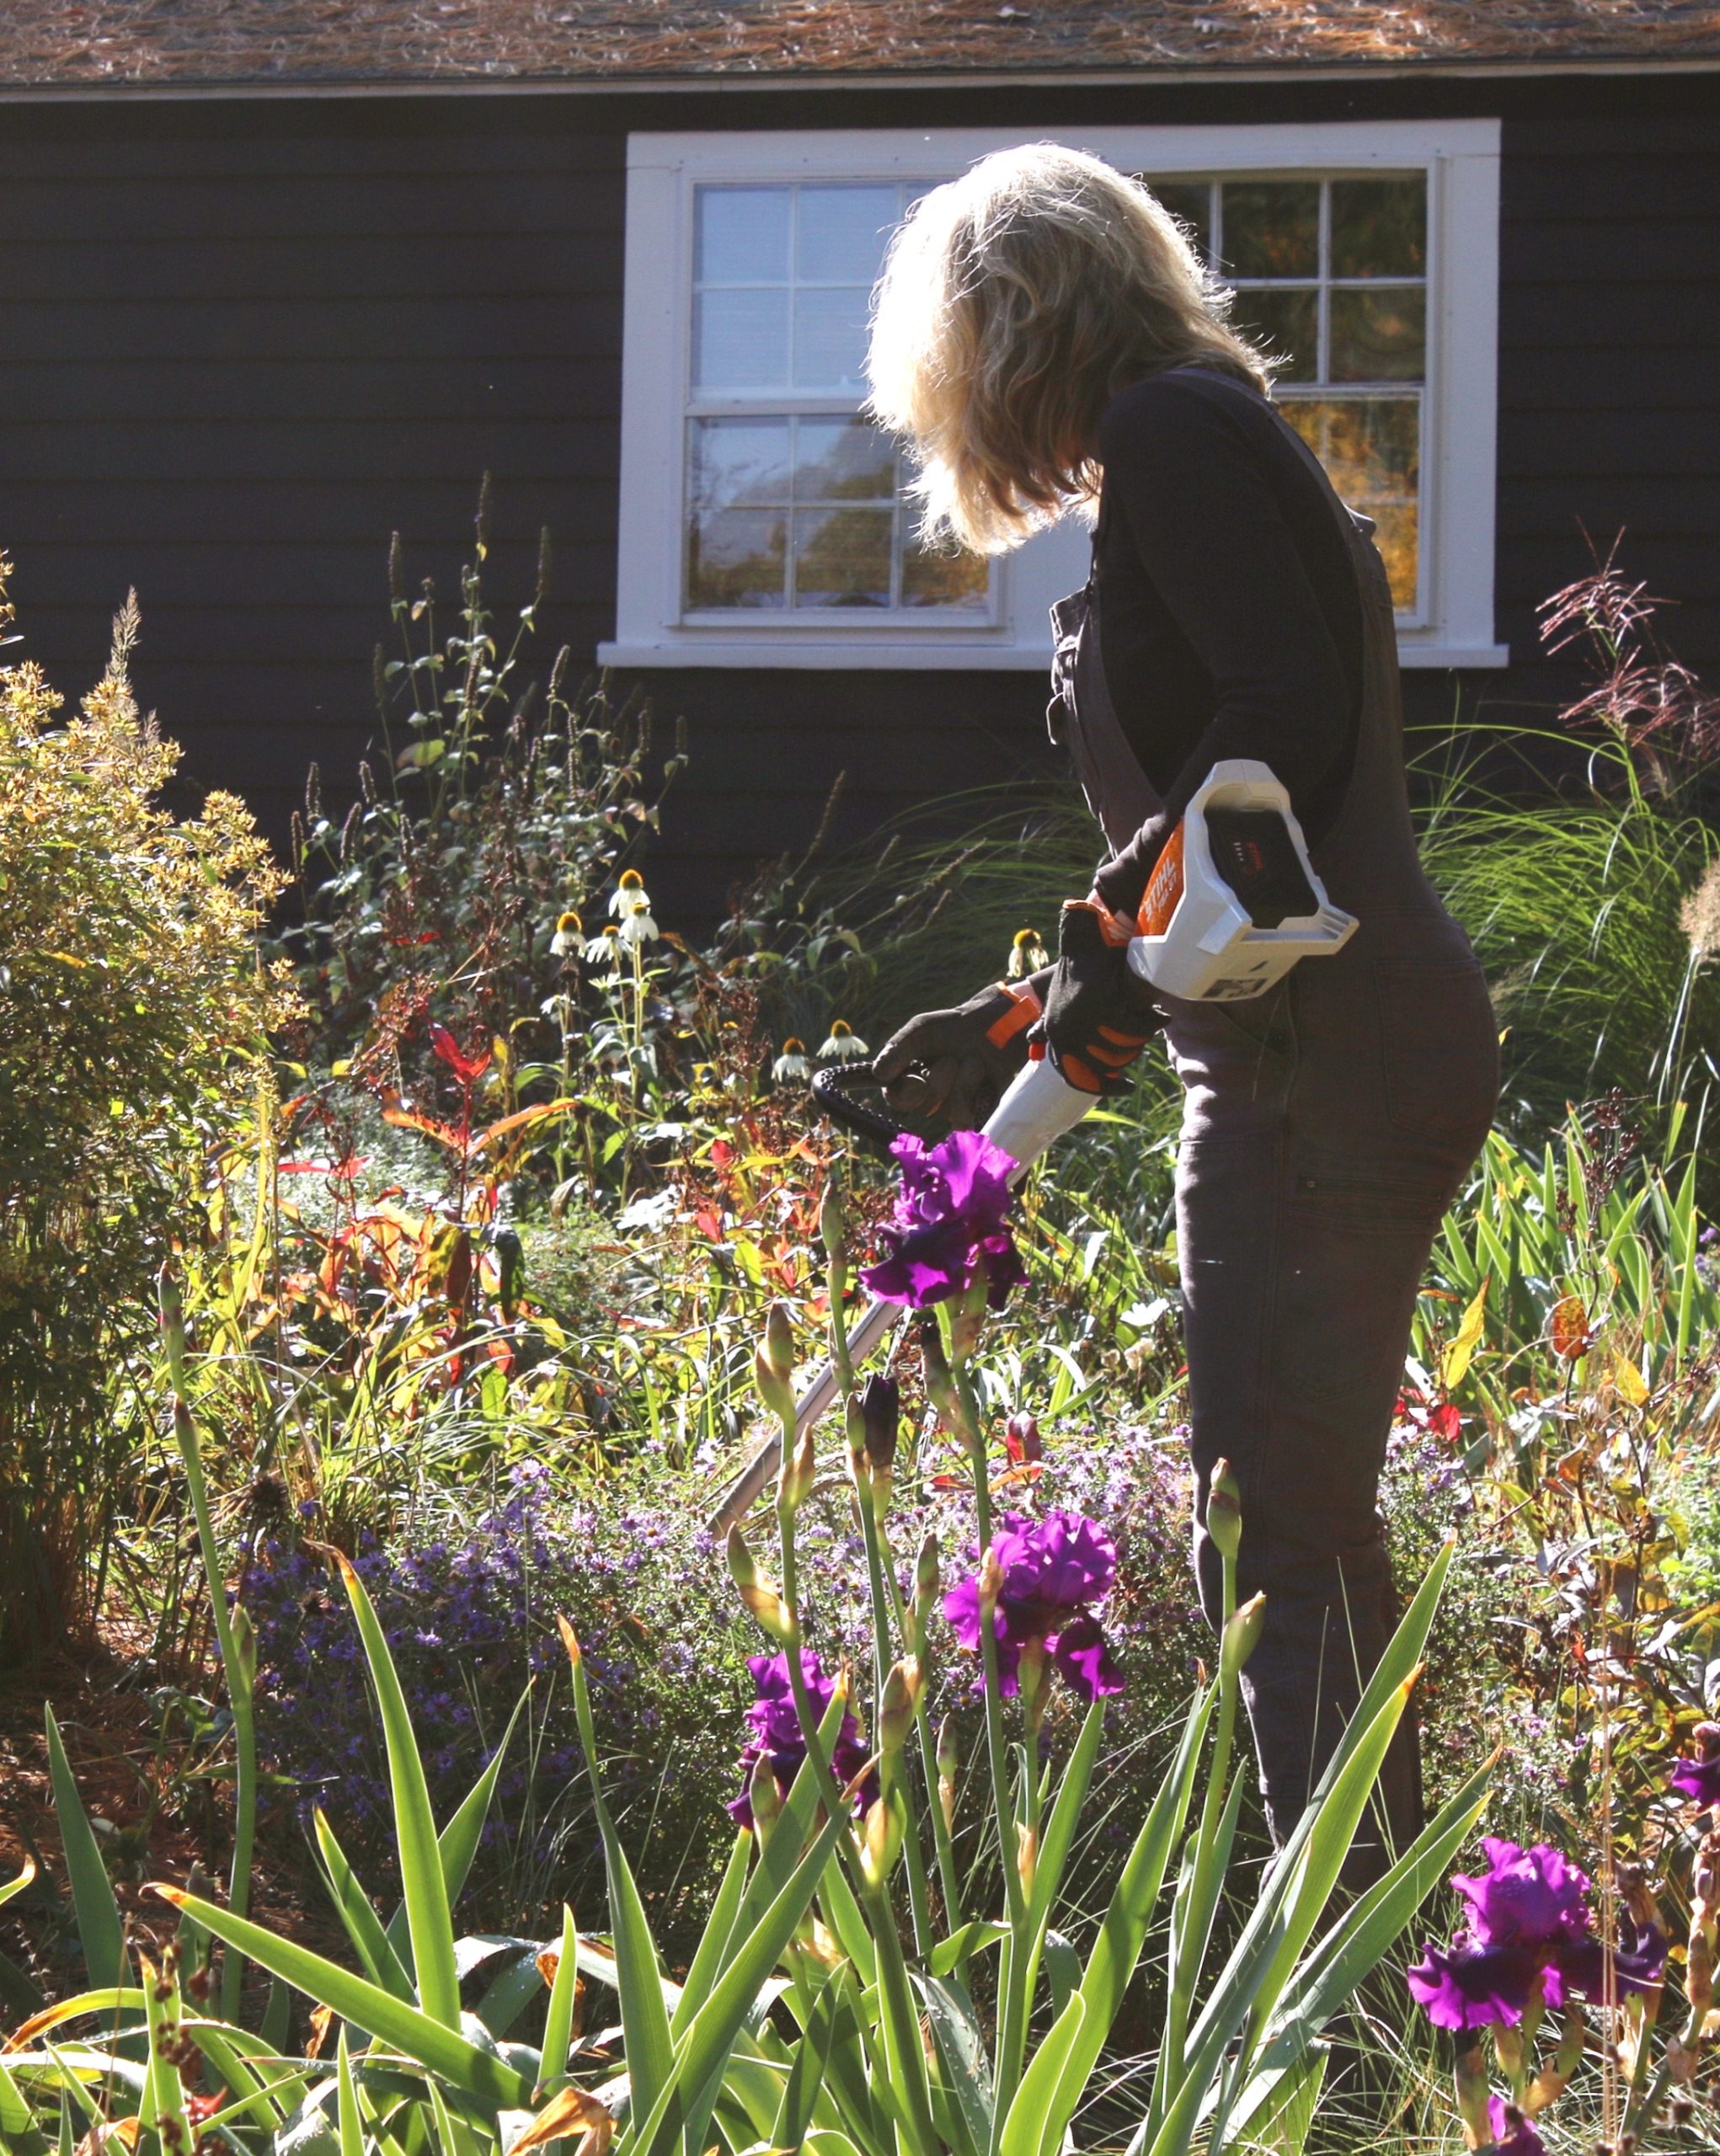 Cut it or keep it - Maintaining a new naturalistic garden